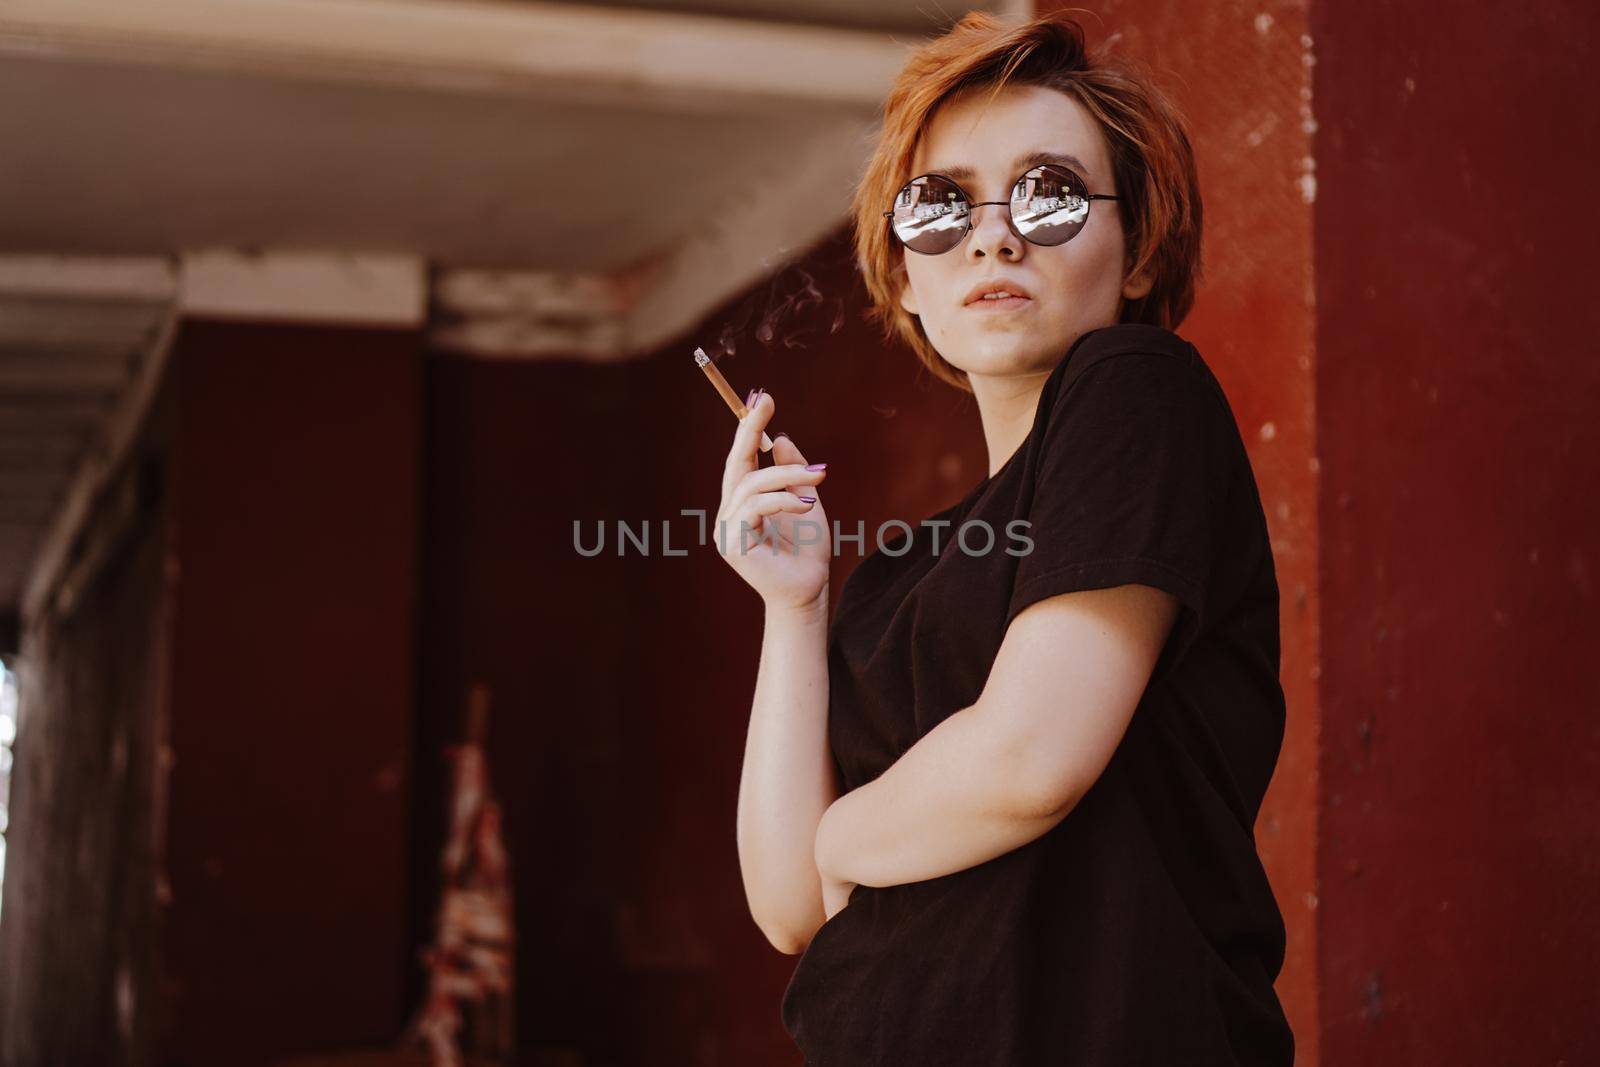 Millennial girl with short red hair and mirror sunglasses smoking cigarette by natali_brill